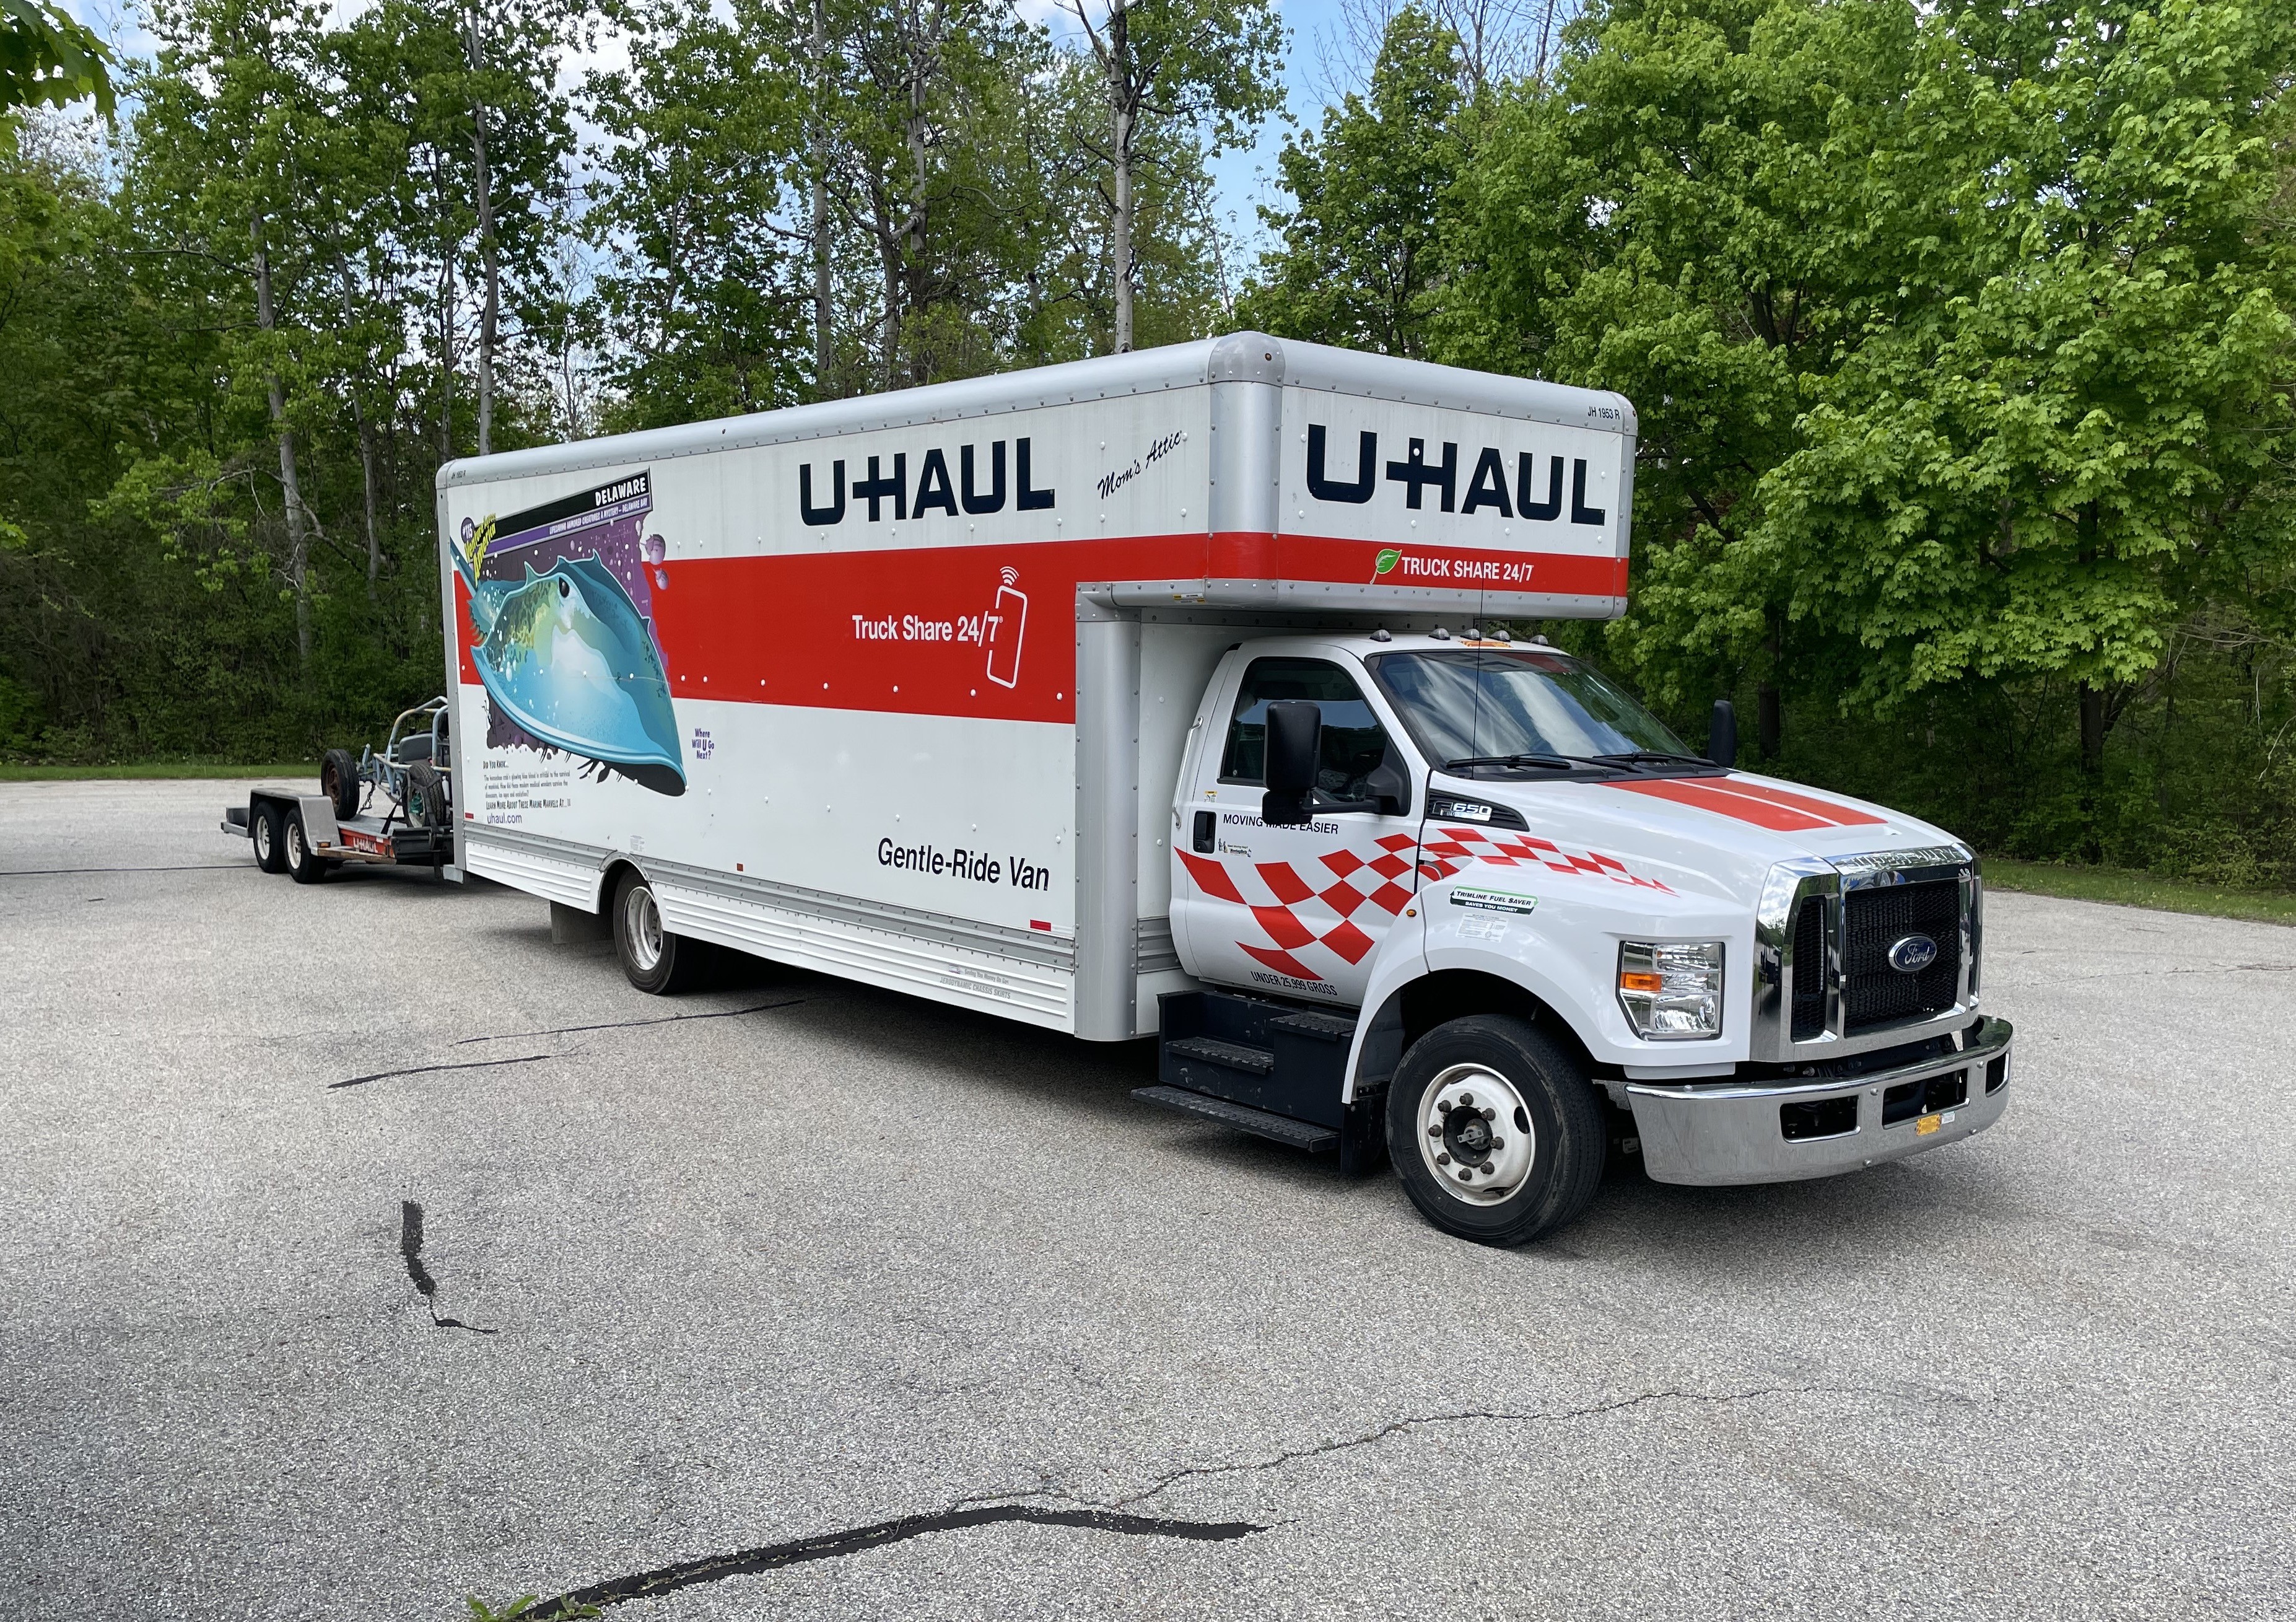 Driving a 26-Foot U-Haul Truck Is a Dumb Thing to Do